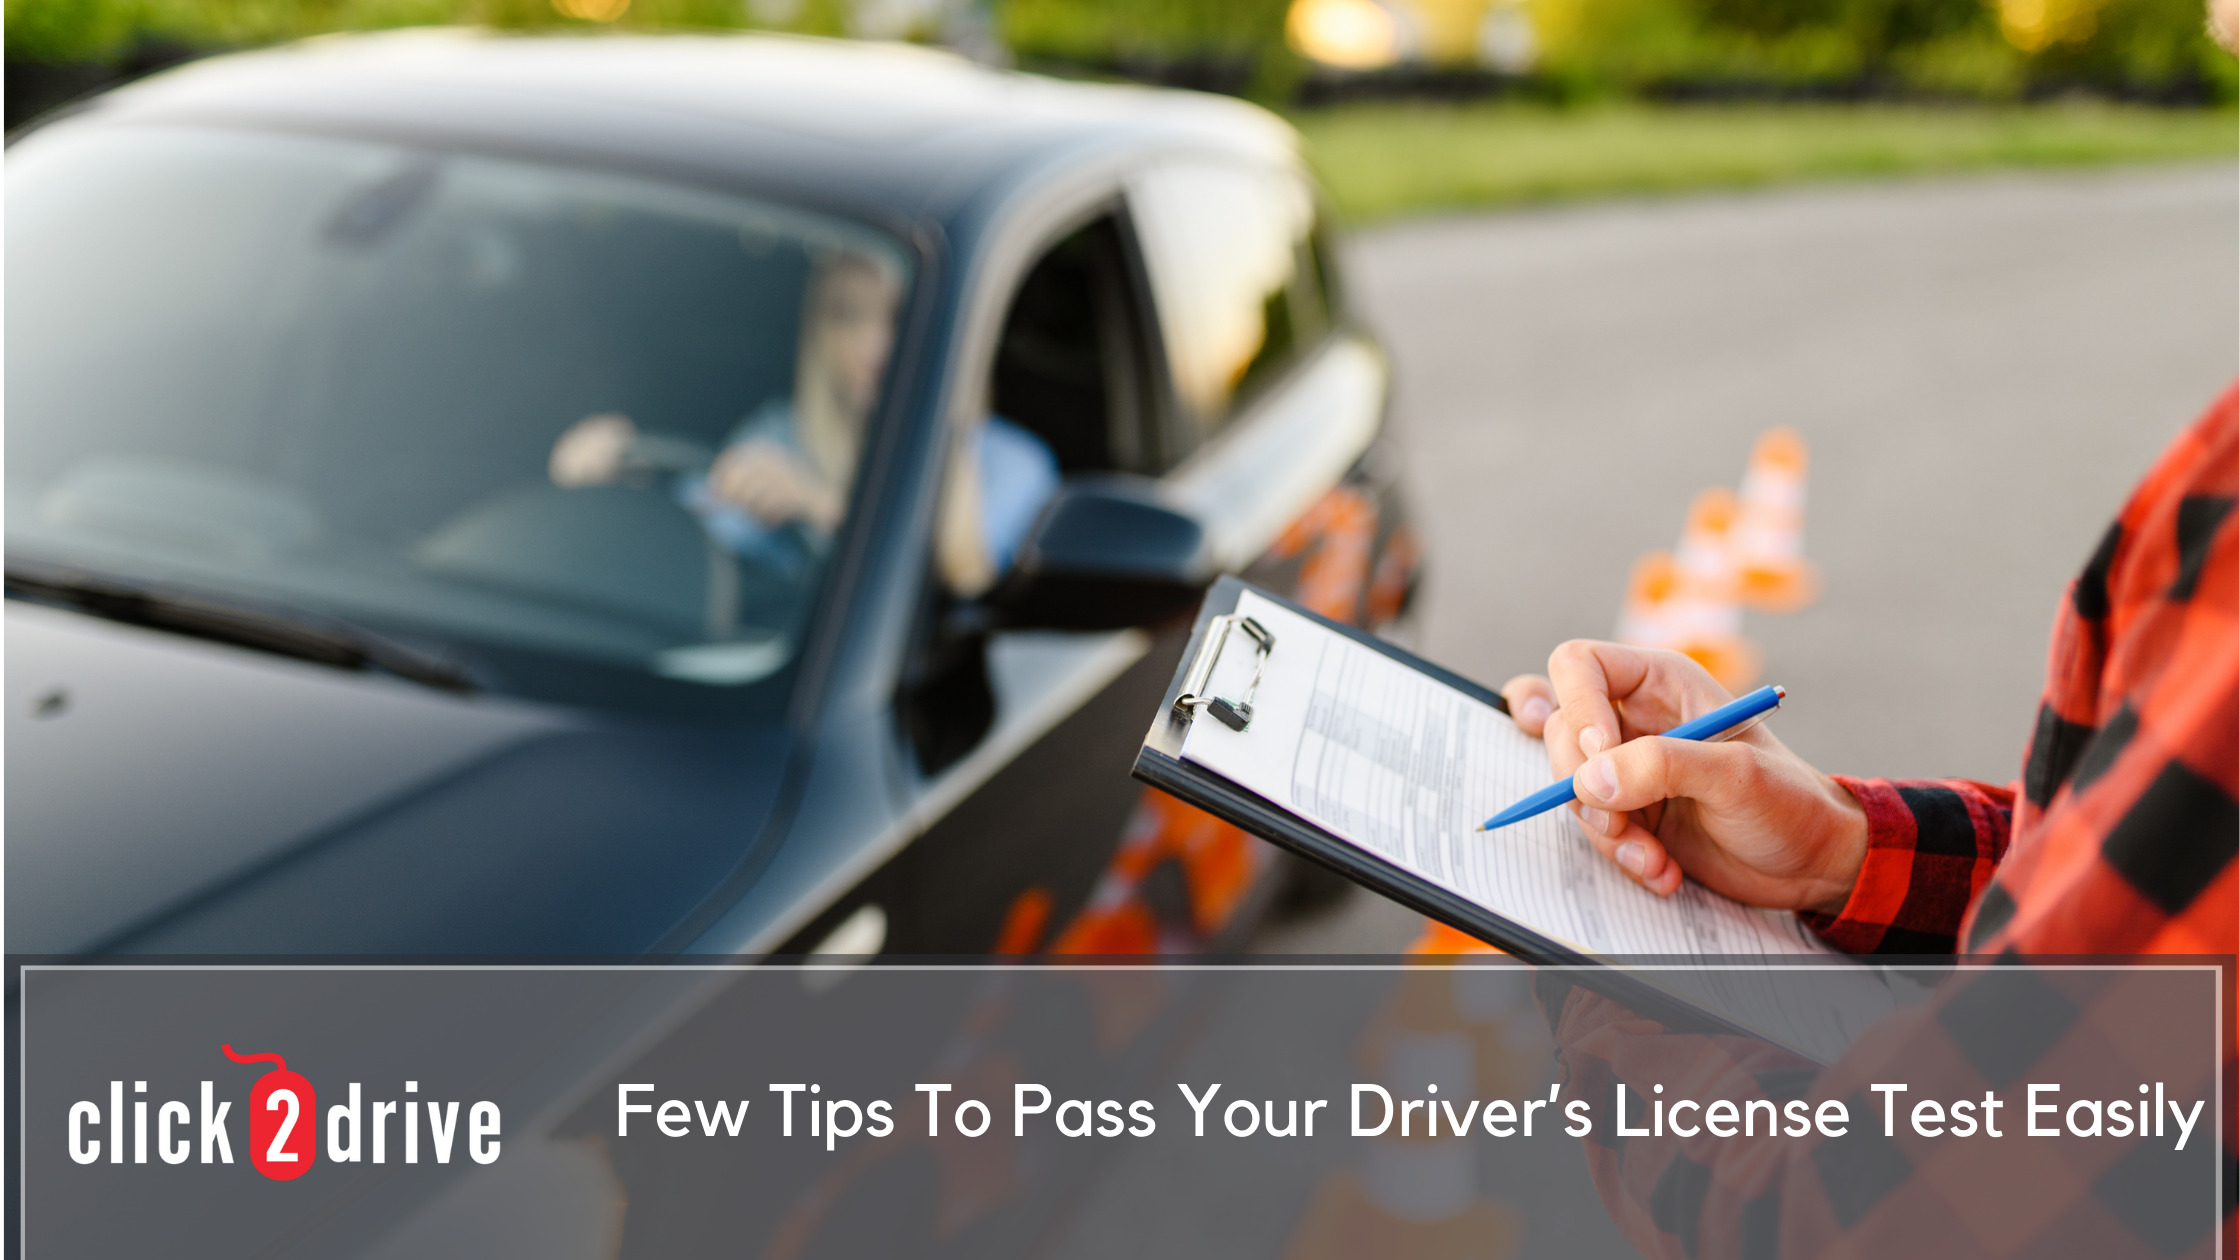 Few Tips To Pass Your Driver’s License Test Easily